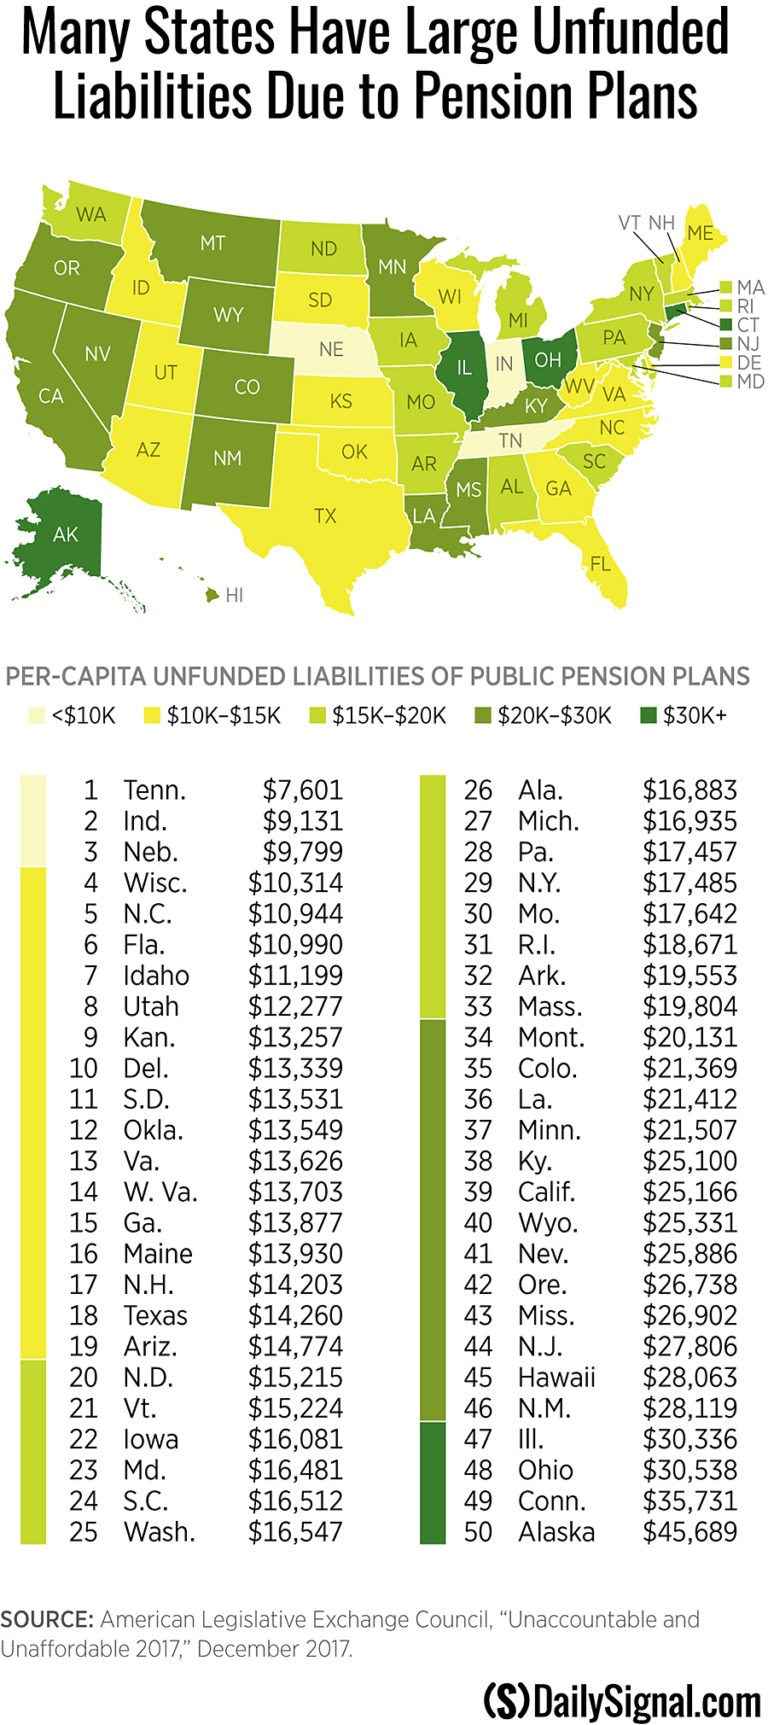 How Big Is Your State’s Share of 6 Trillion in Unfunded Pension